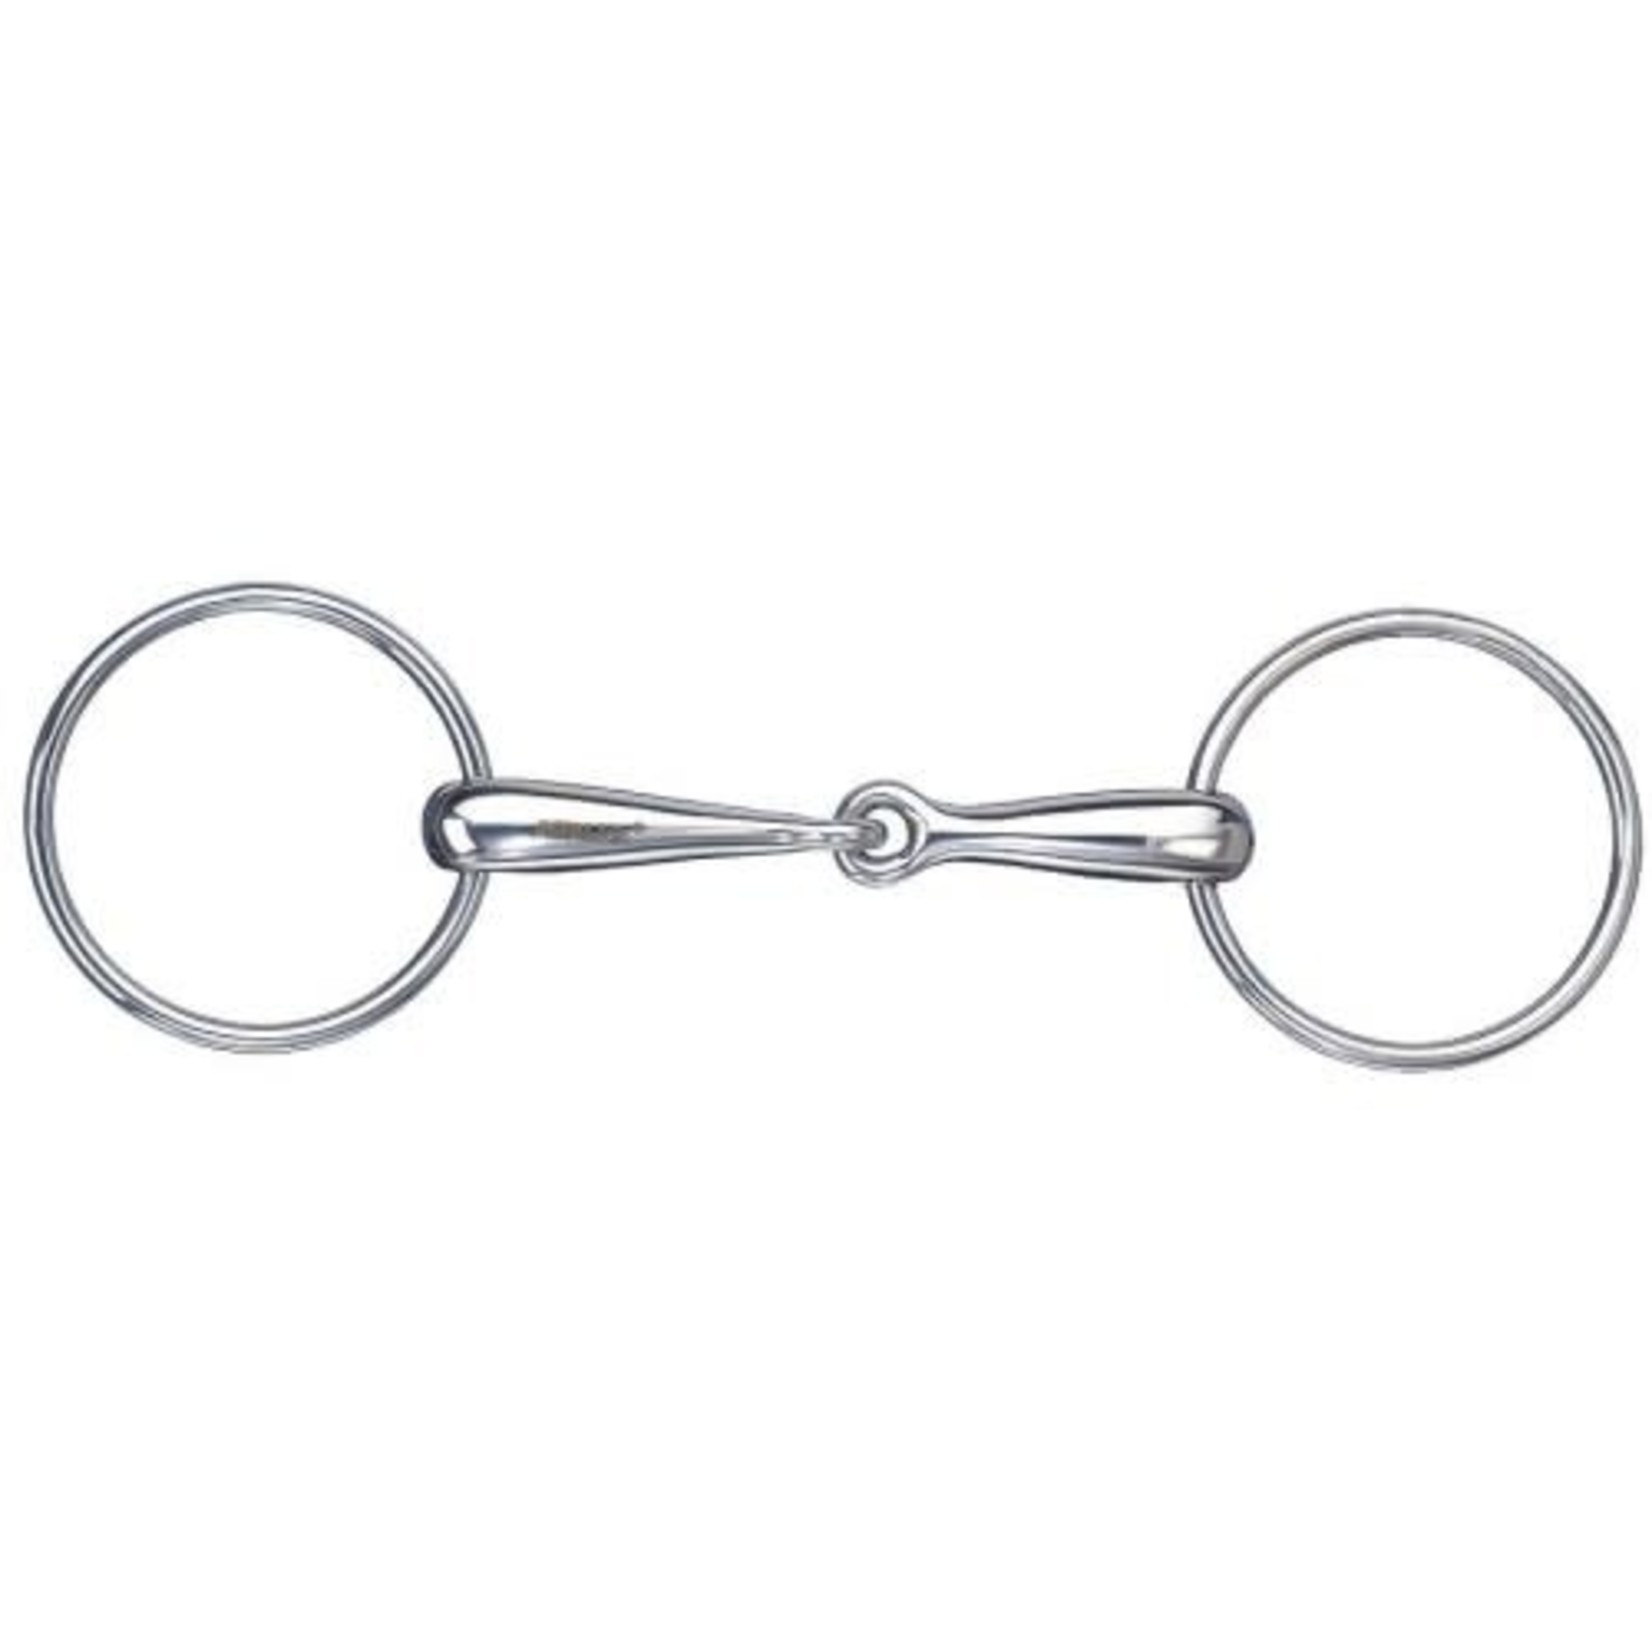 Metalab Stainless Steel Hollow Mouth Snaffle